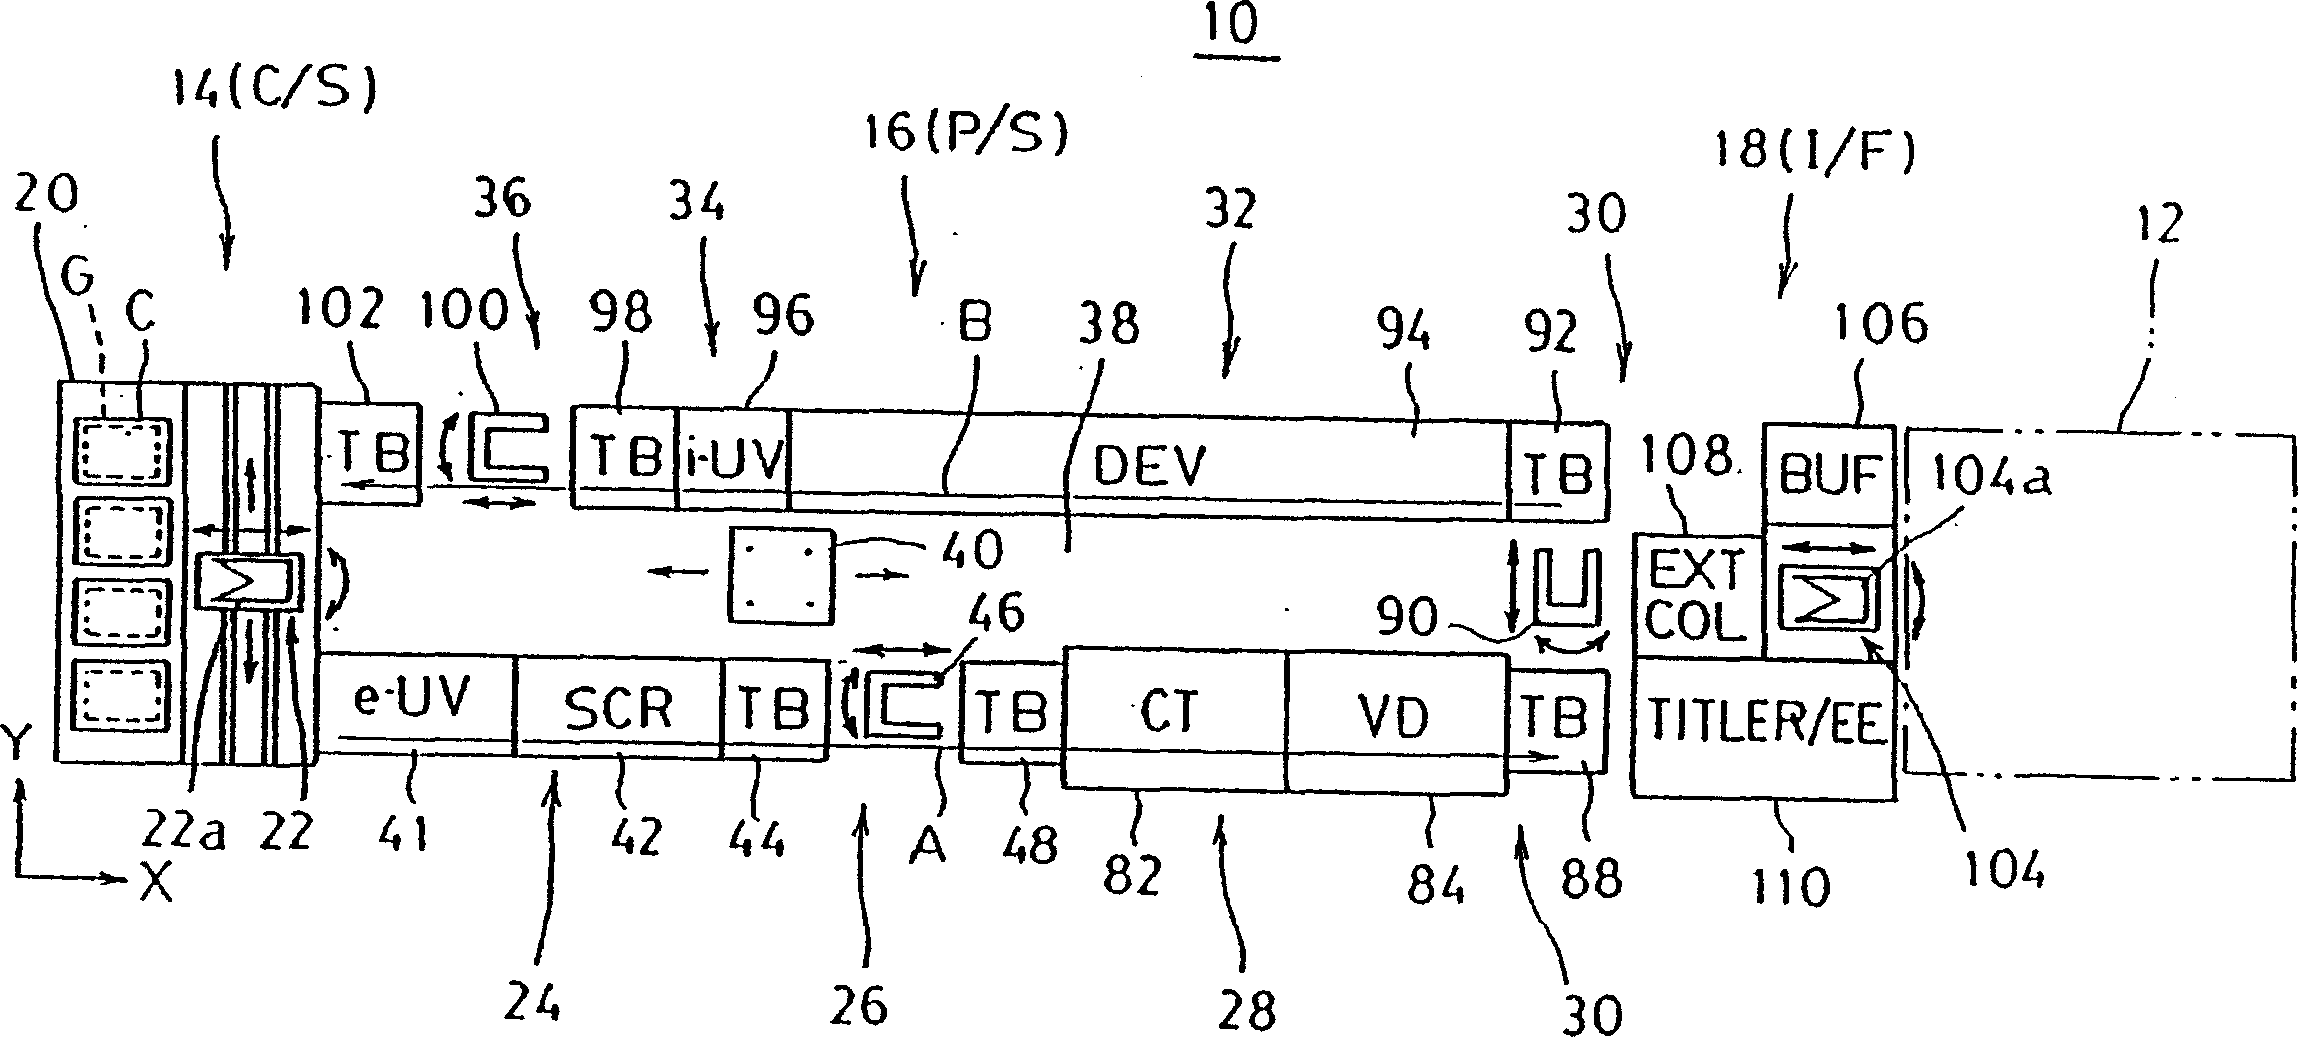 Substrate processing apparatus and substrate positioning device